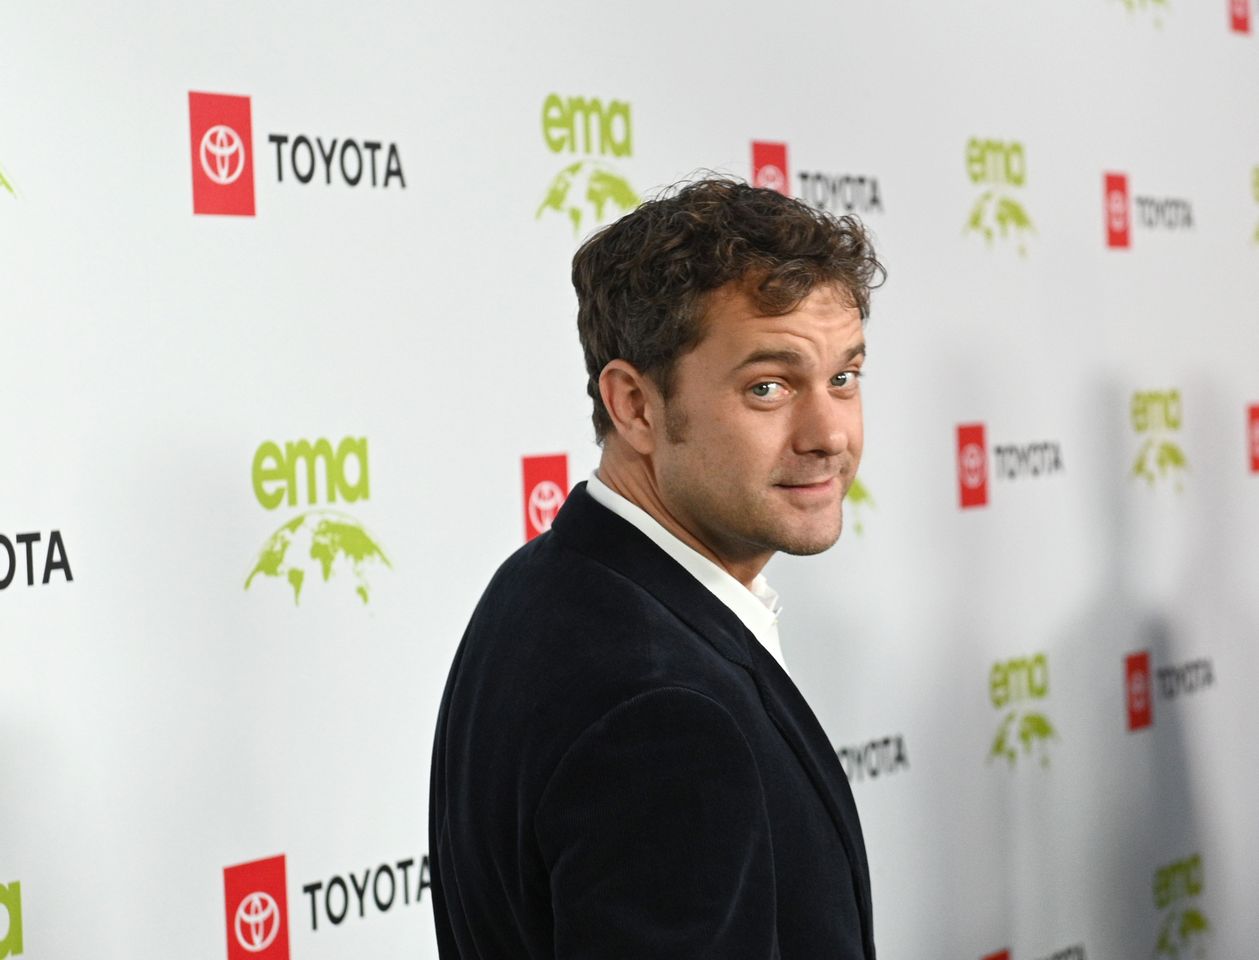 Joshua Jackson at the Environmental Media Association 2nd Annual Honors Benefit Gala at Private Residence in Pacific Palisades, California on September 28, 2019. | Photo: Getty Images